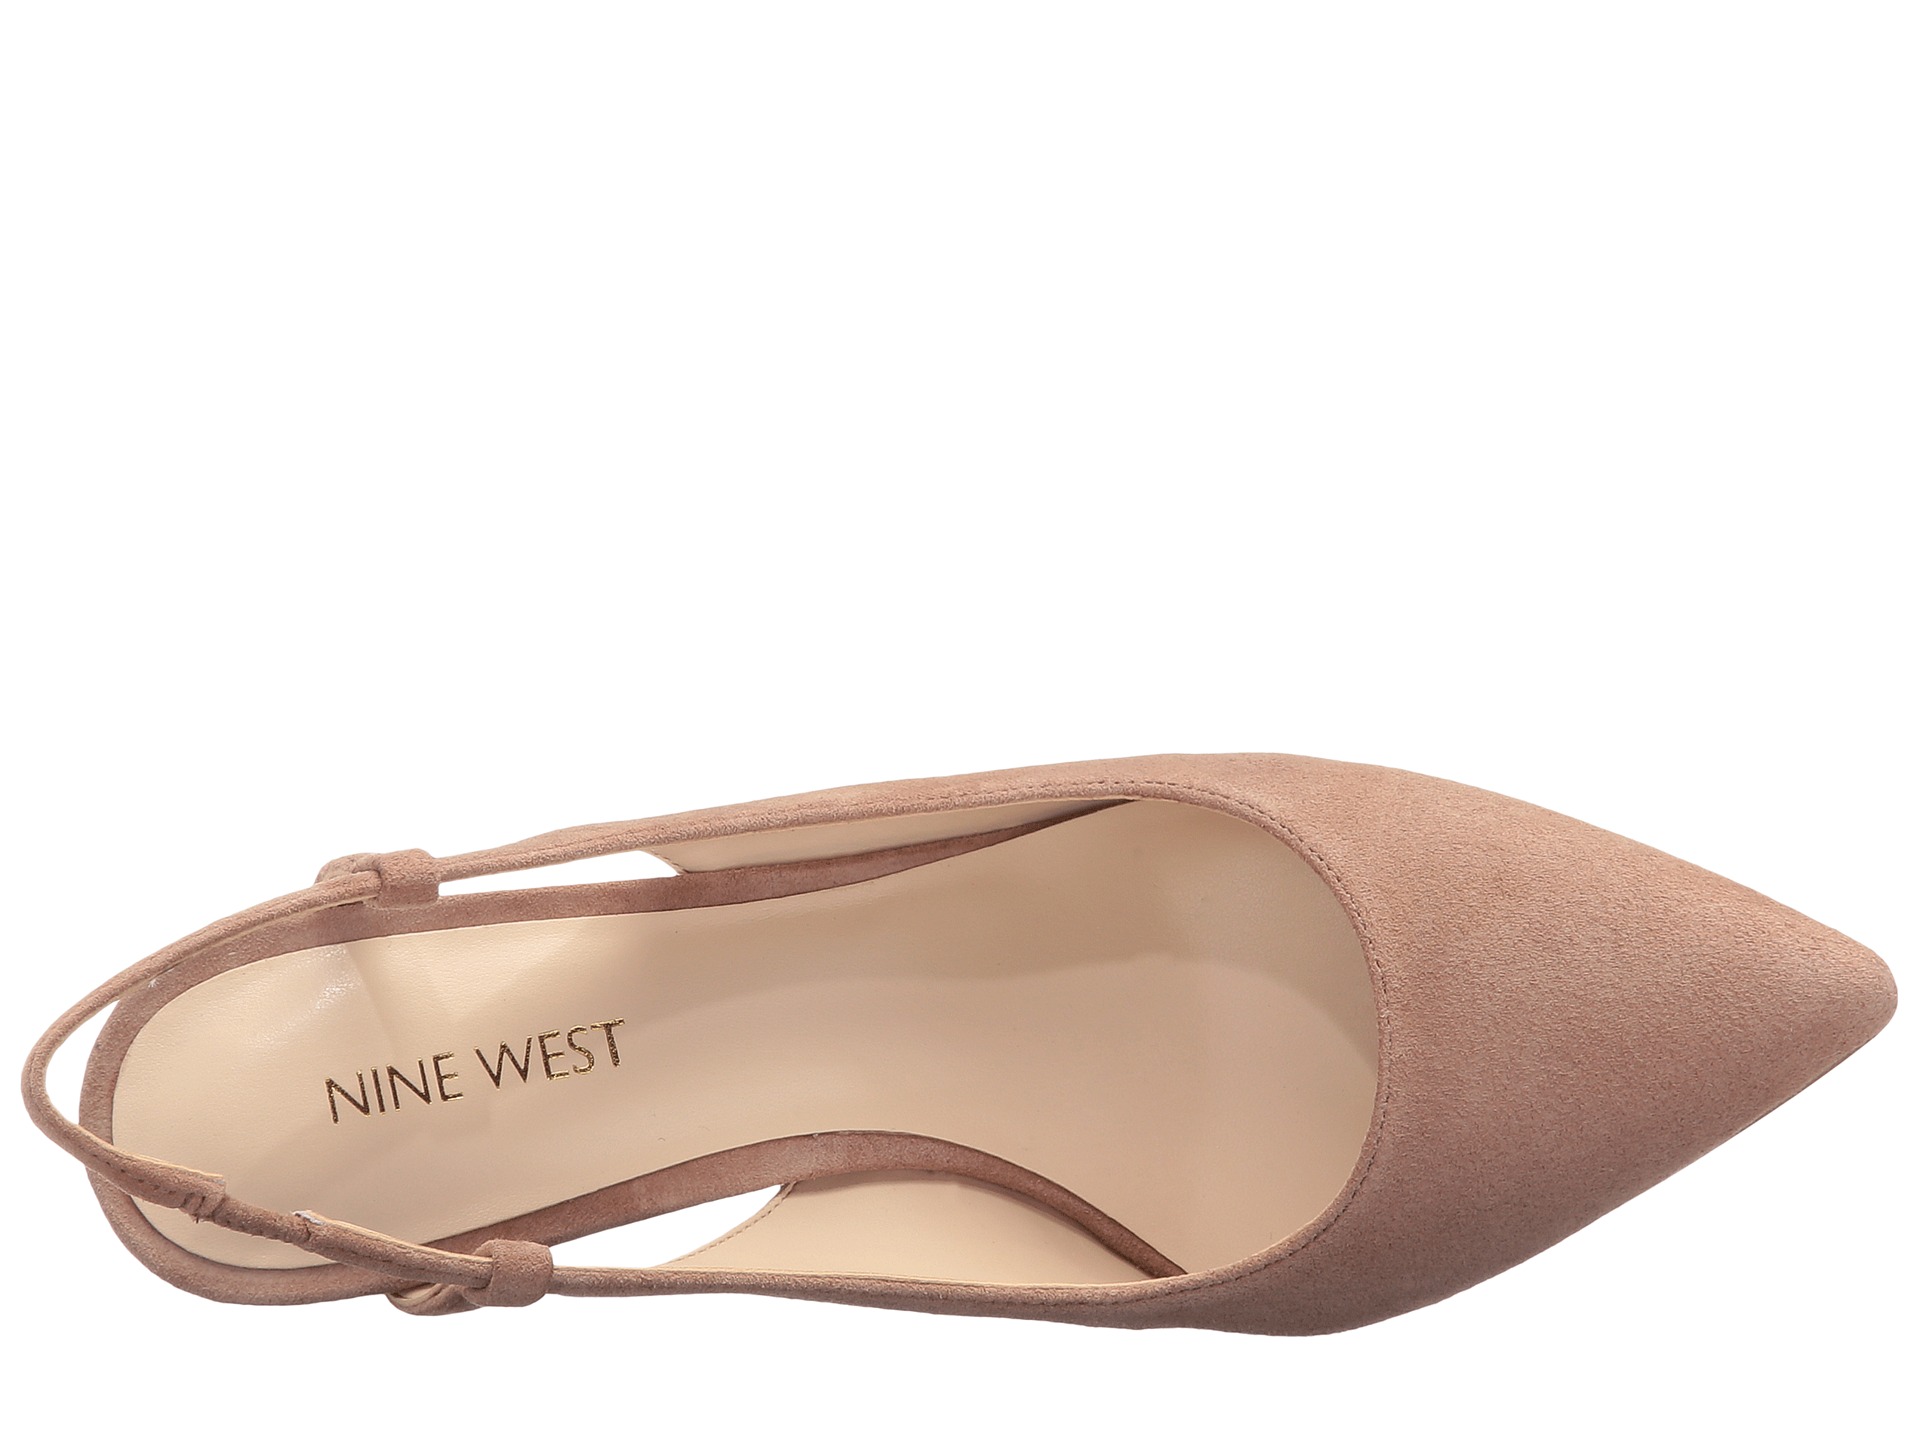 Nine West Tarly Natural Suede - Zappos.com Free Shipping BOTH Ways